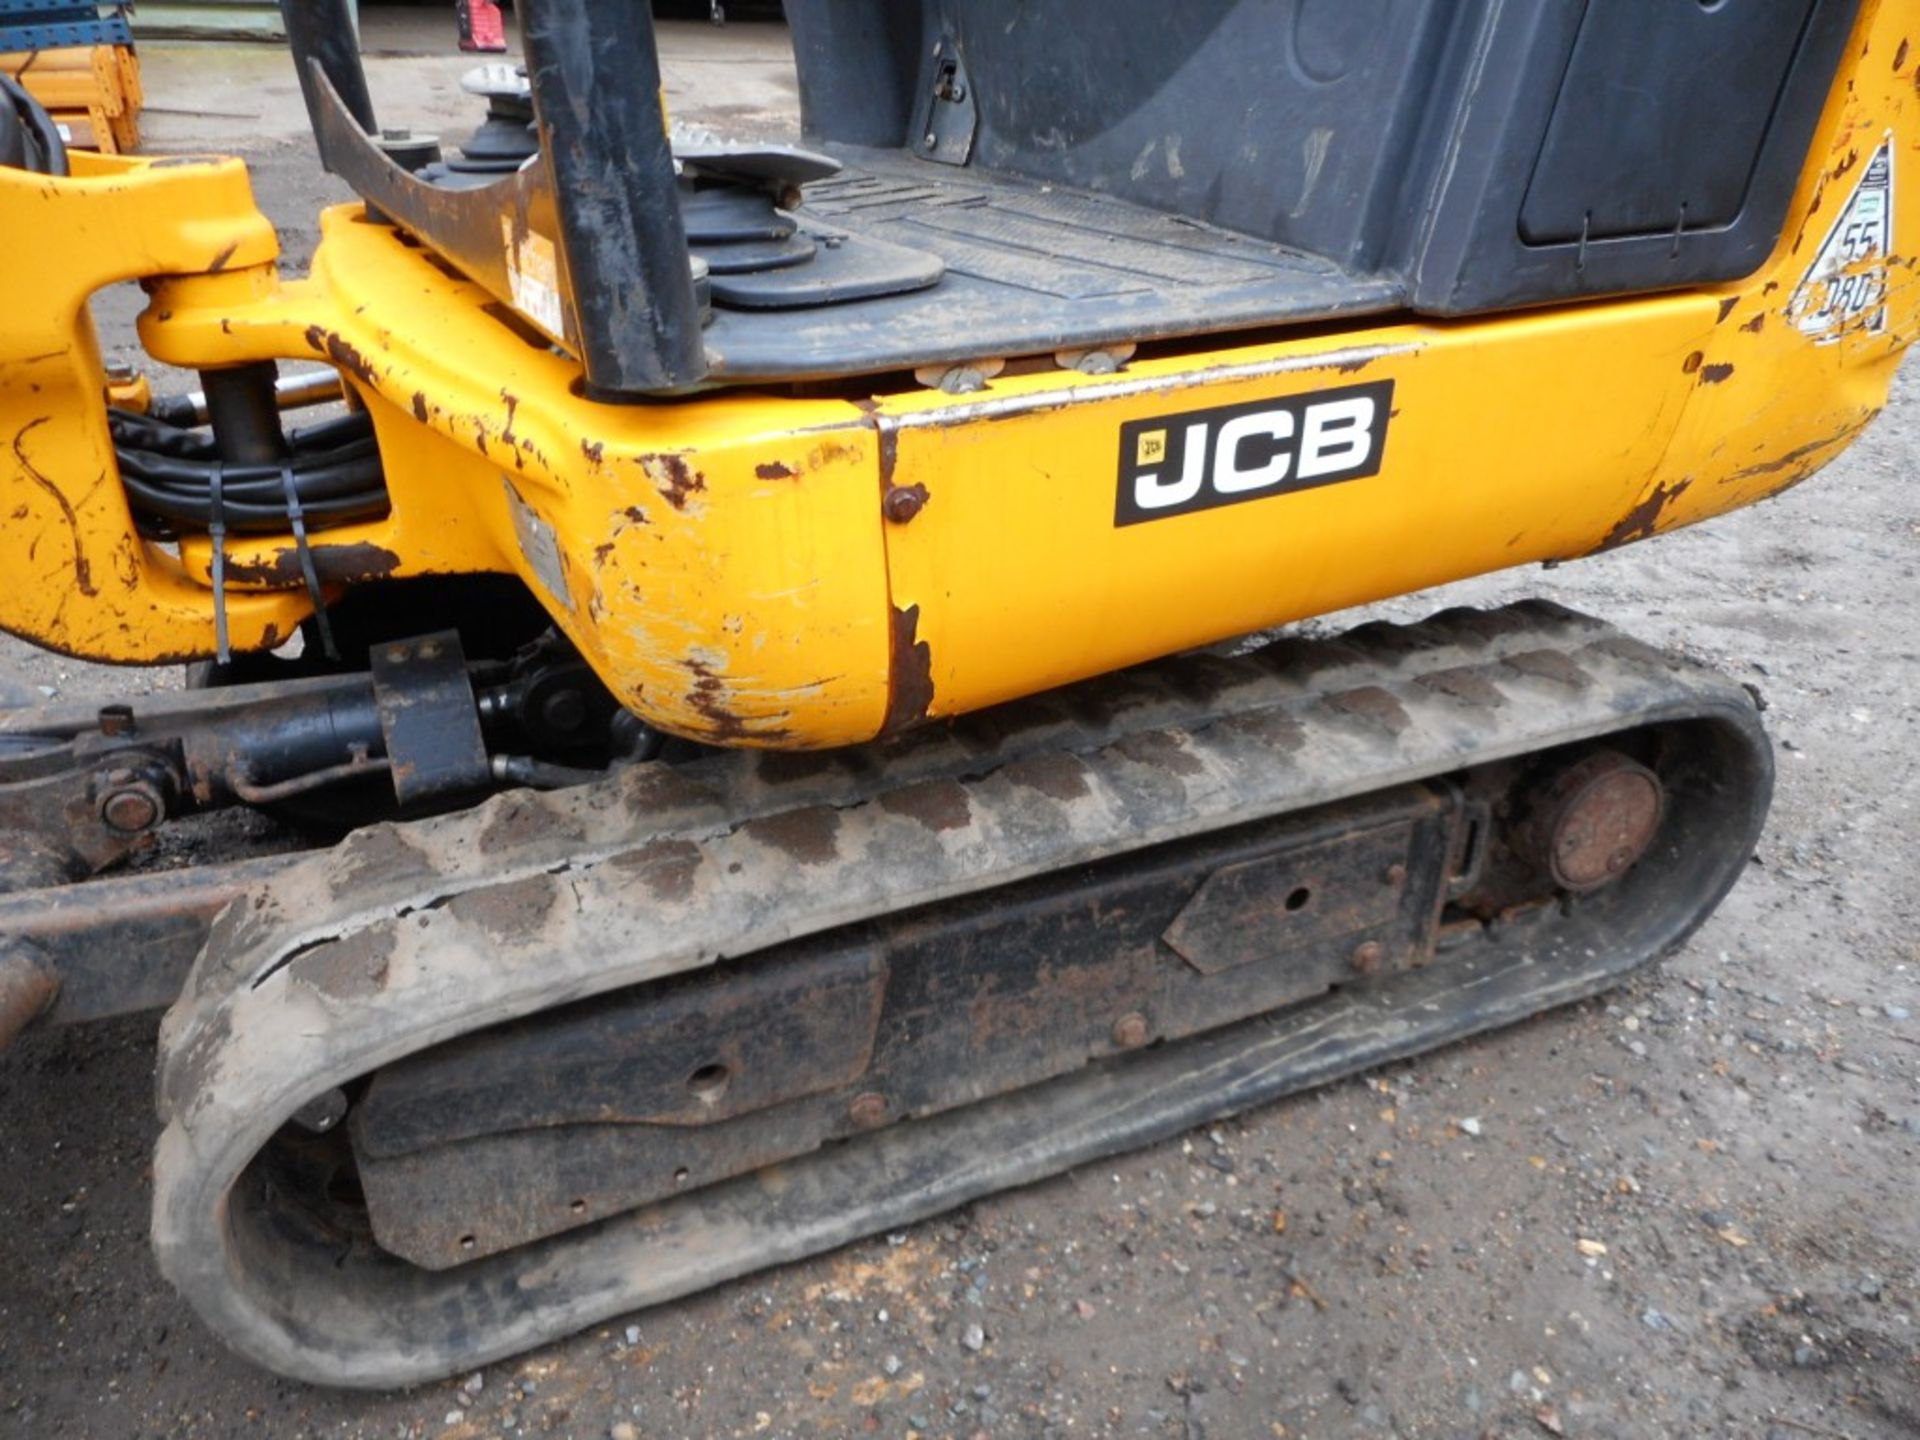 JCB 801-4 mini digger c/w 3no. buckets yr2011 build 1200 recorded hours. - Image 17 of 17